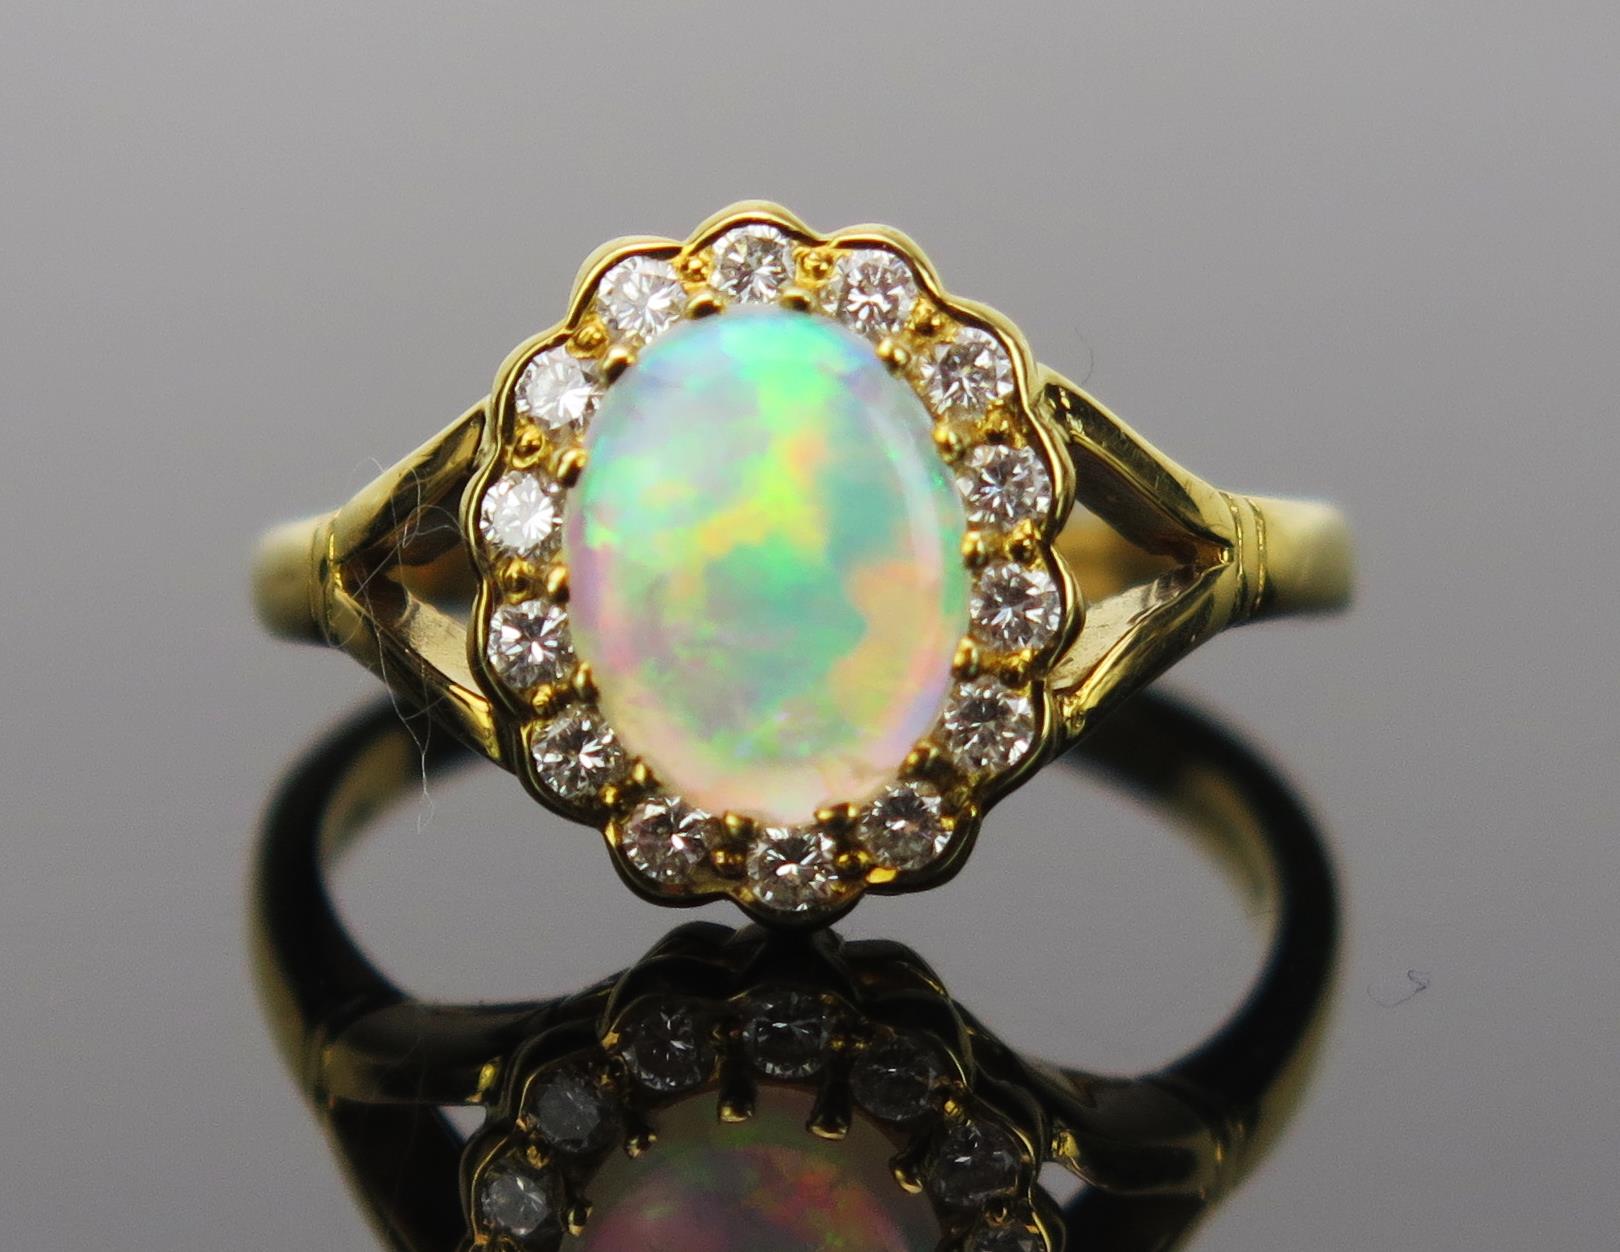 White Opal and Diamond Cluster Ring in an 18ct hallmarked gold setting, 9x7mm central stone, 13x11mm - Image 4 of 5